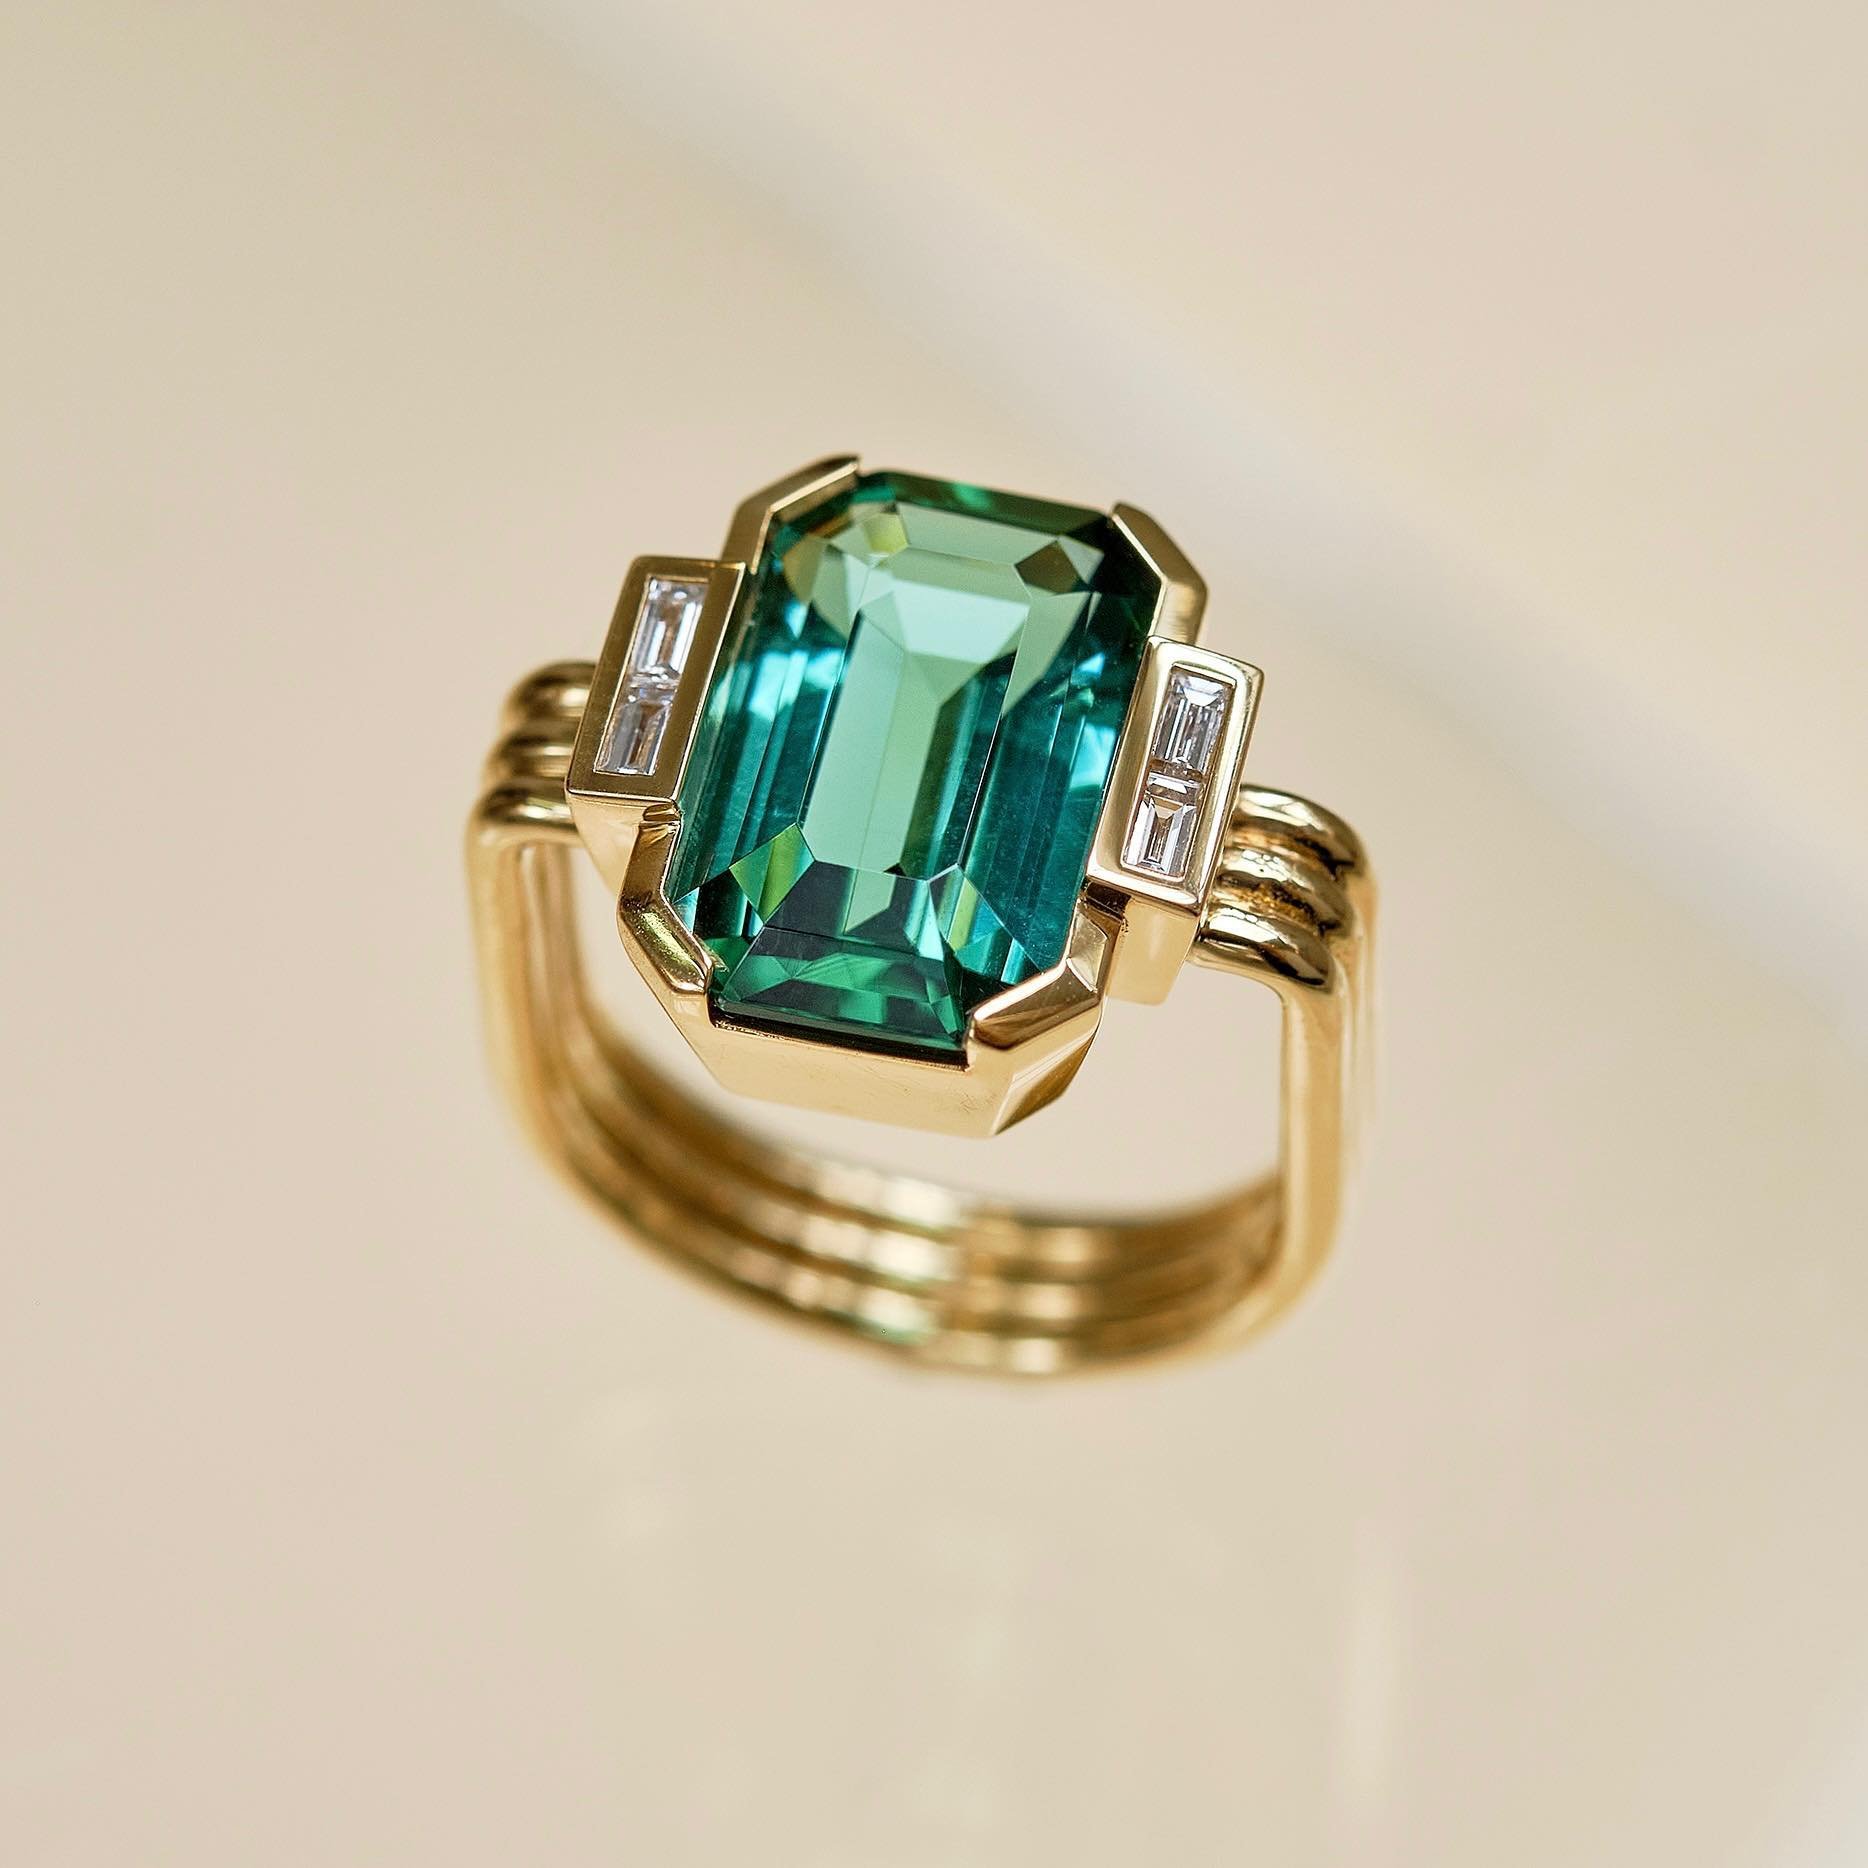 Pompidou ring with green tourmaline and diamonds. More pieces on our website.